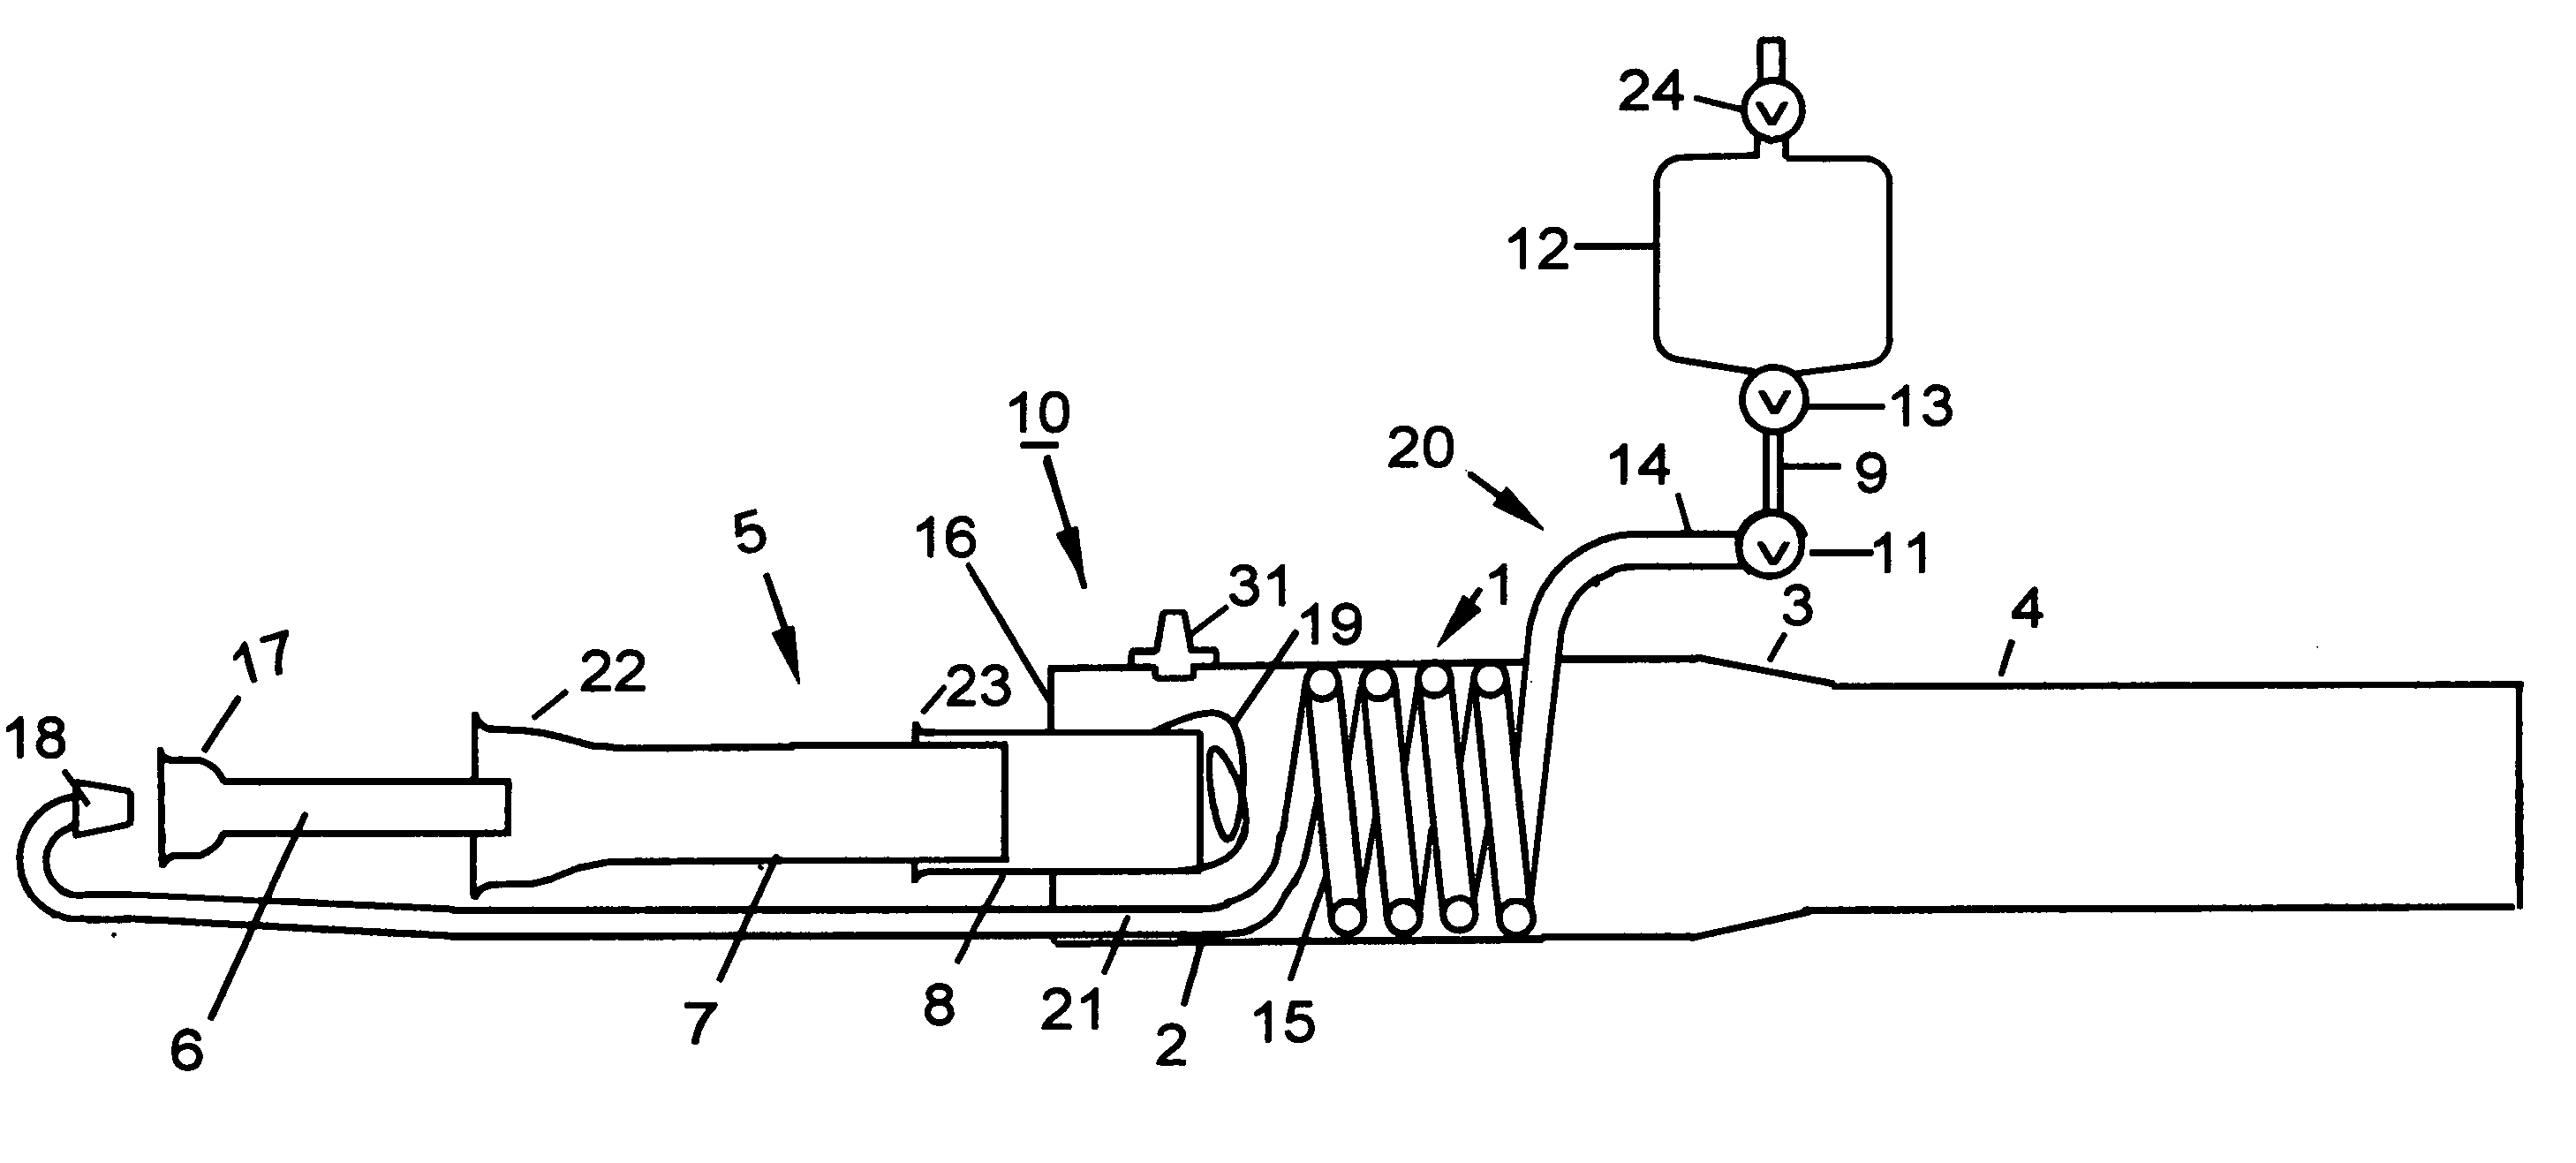 High static thrust valveless pulse-jet engine with forward-facing intake duct